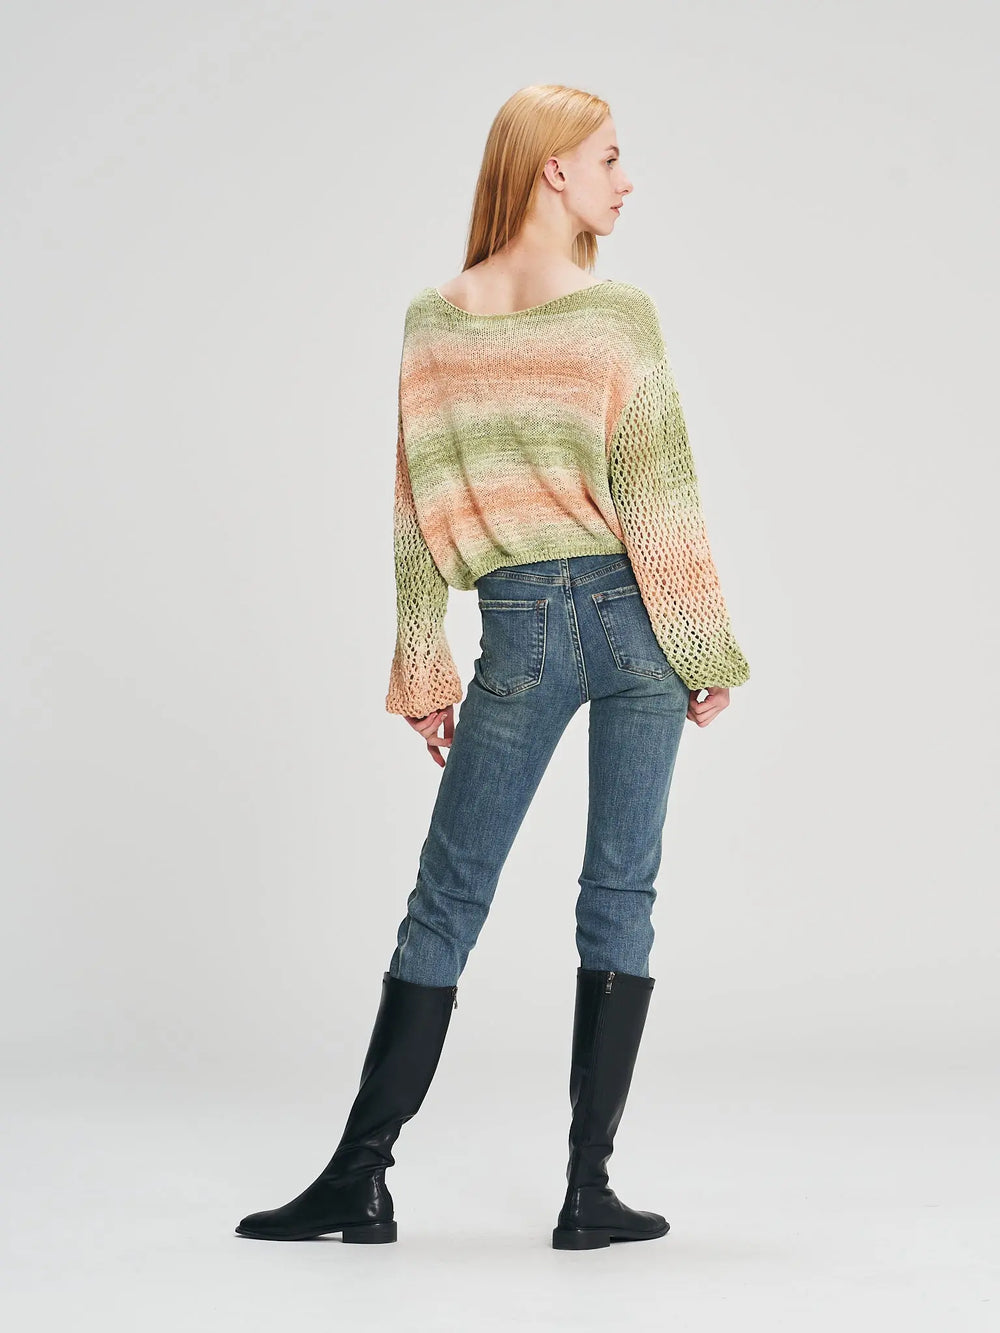 An image of a   S7601 Crochet Sweater by  Mirra Masa